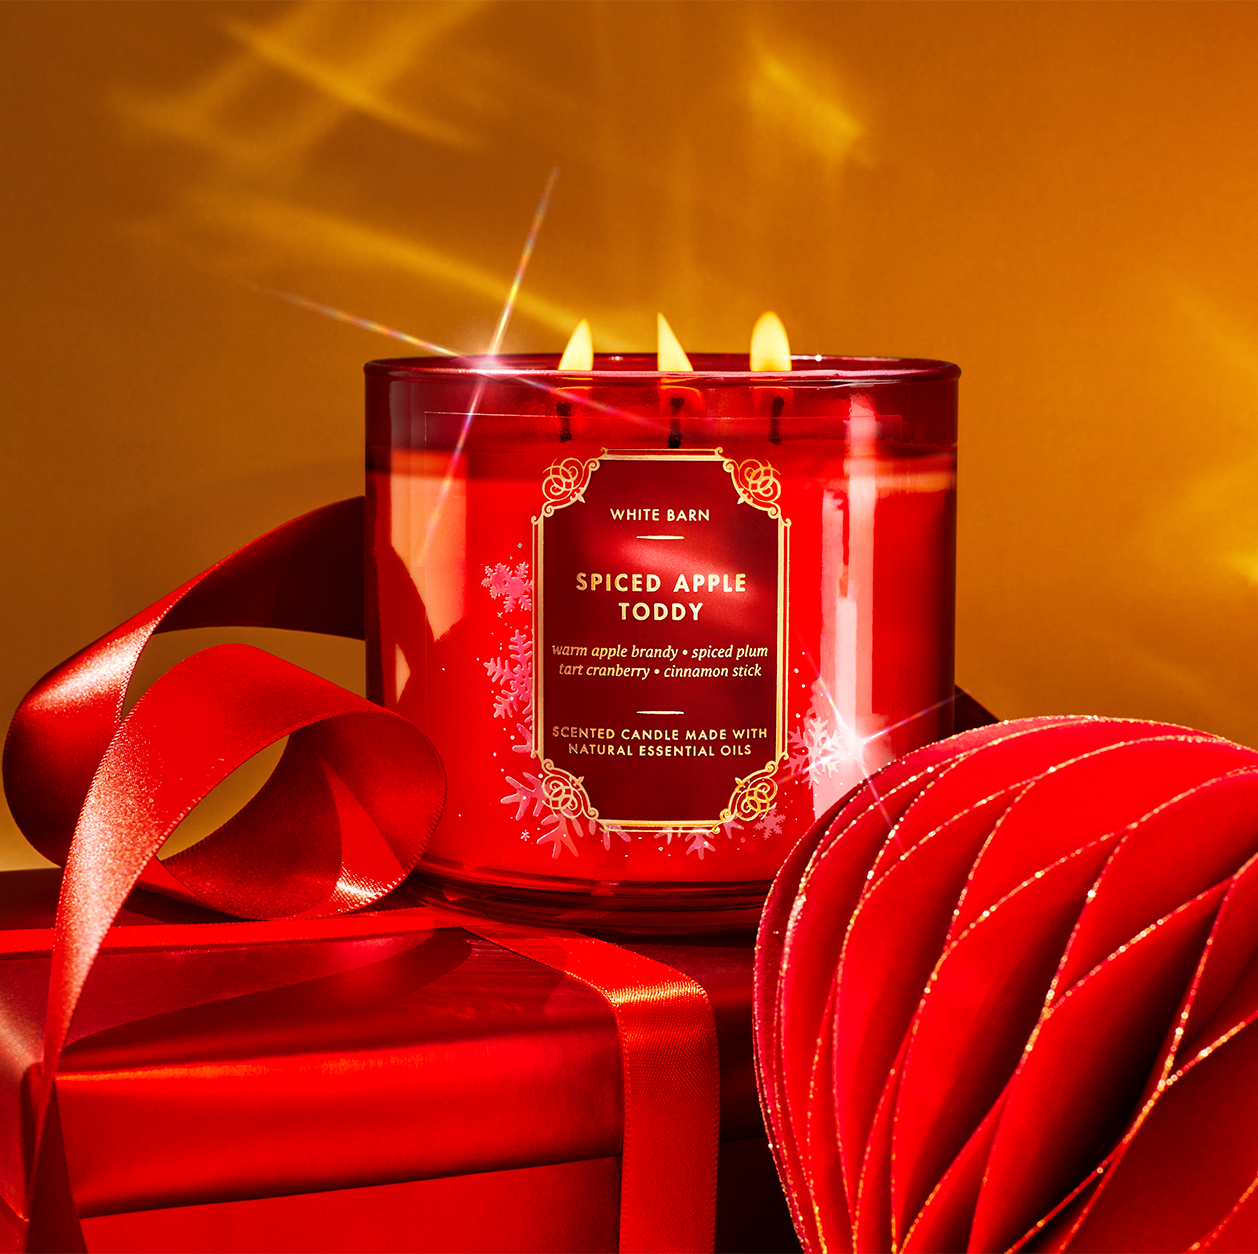 Alert: Bath & Body Works’ $10 Candle Day Sale Has Arrived (and the Holiday Deals Are Too Good)